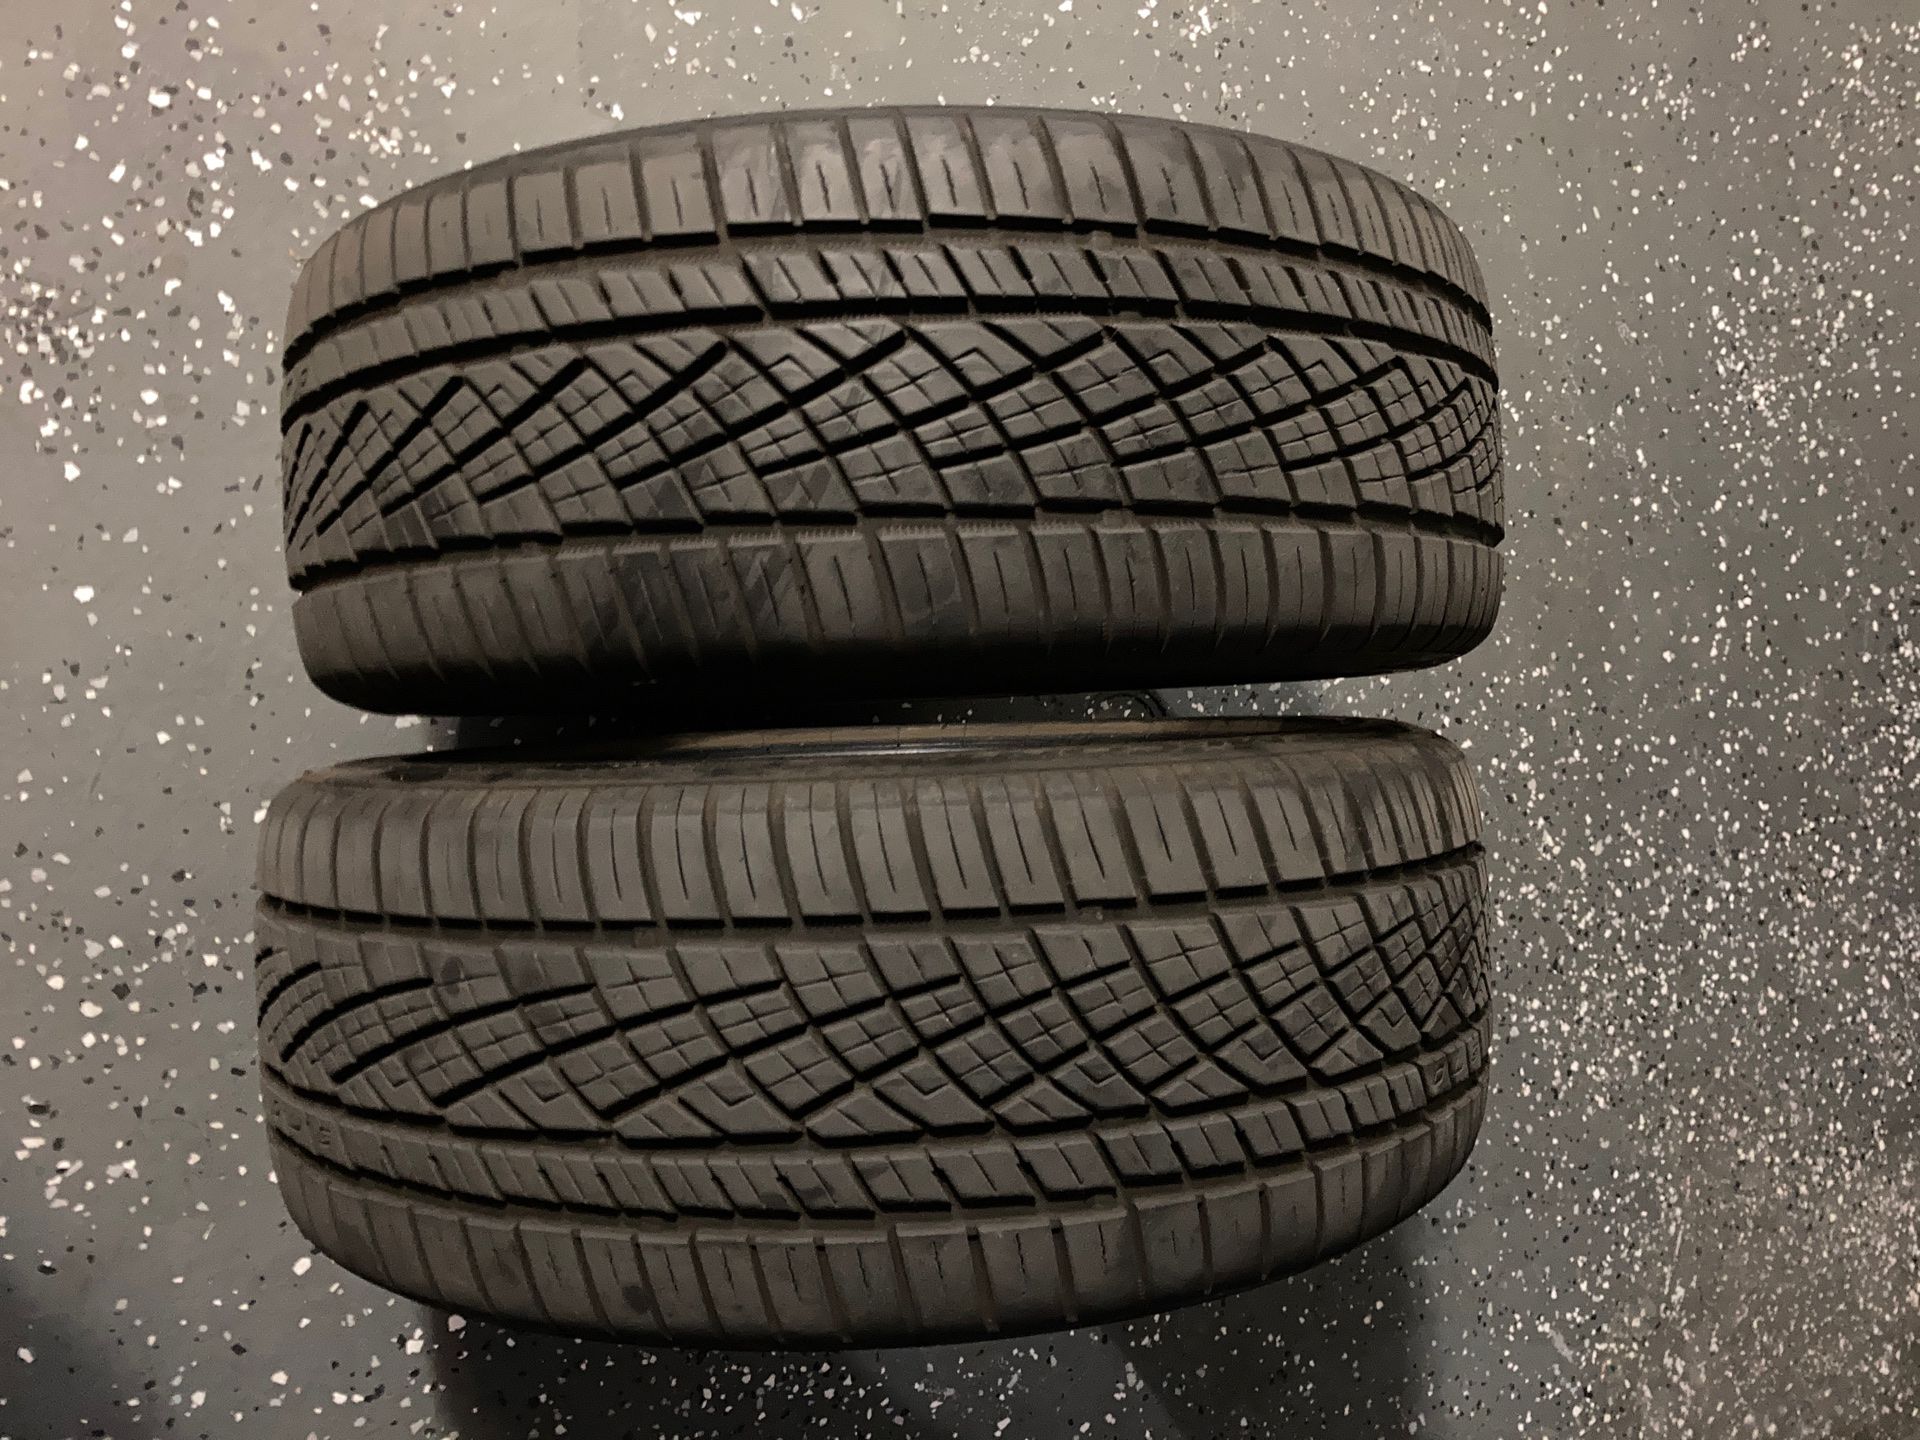 225-45-18 Continental tires